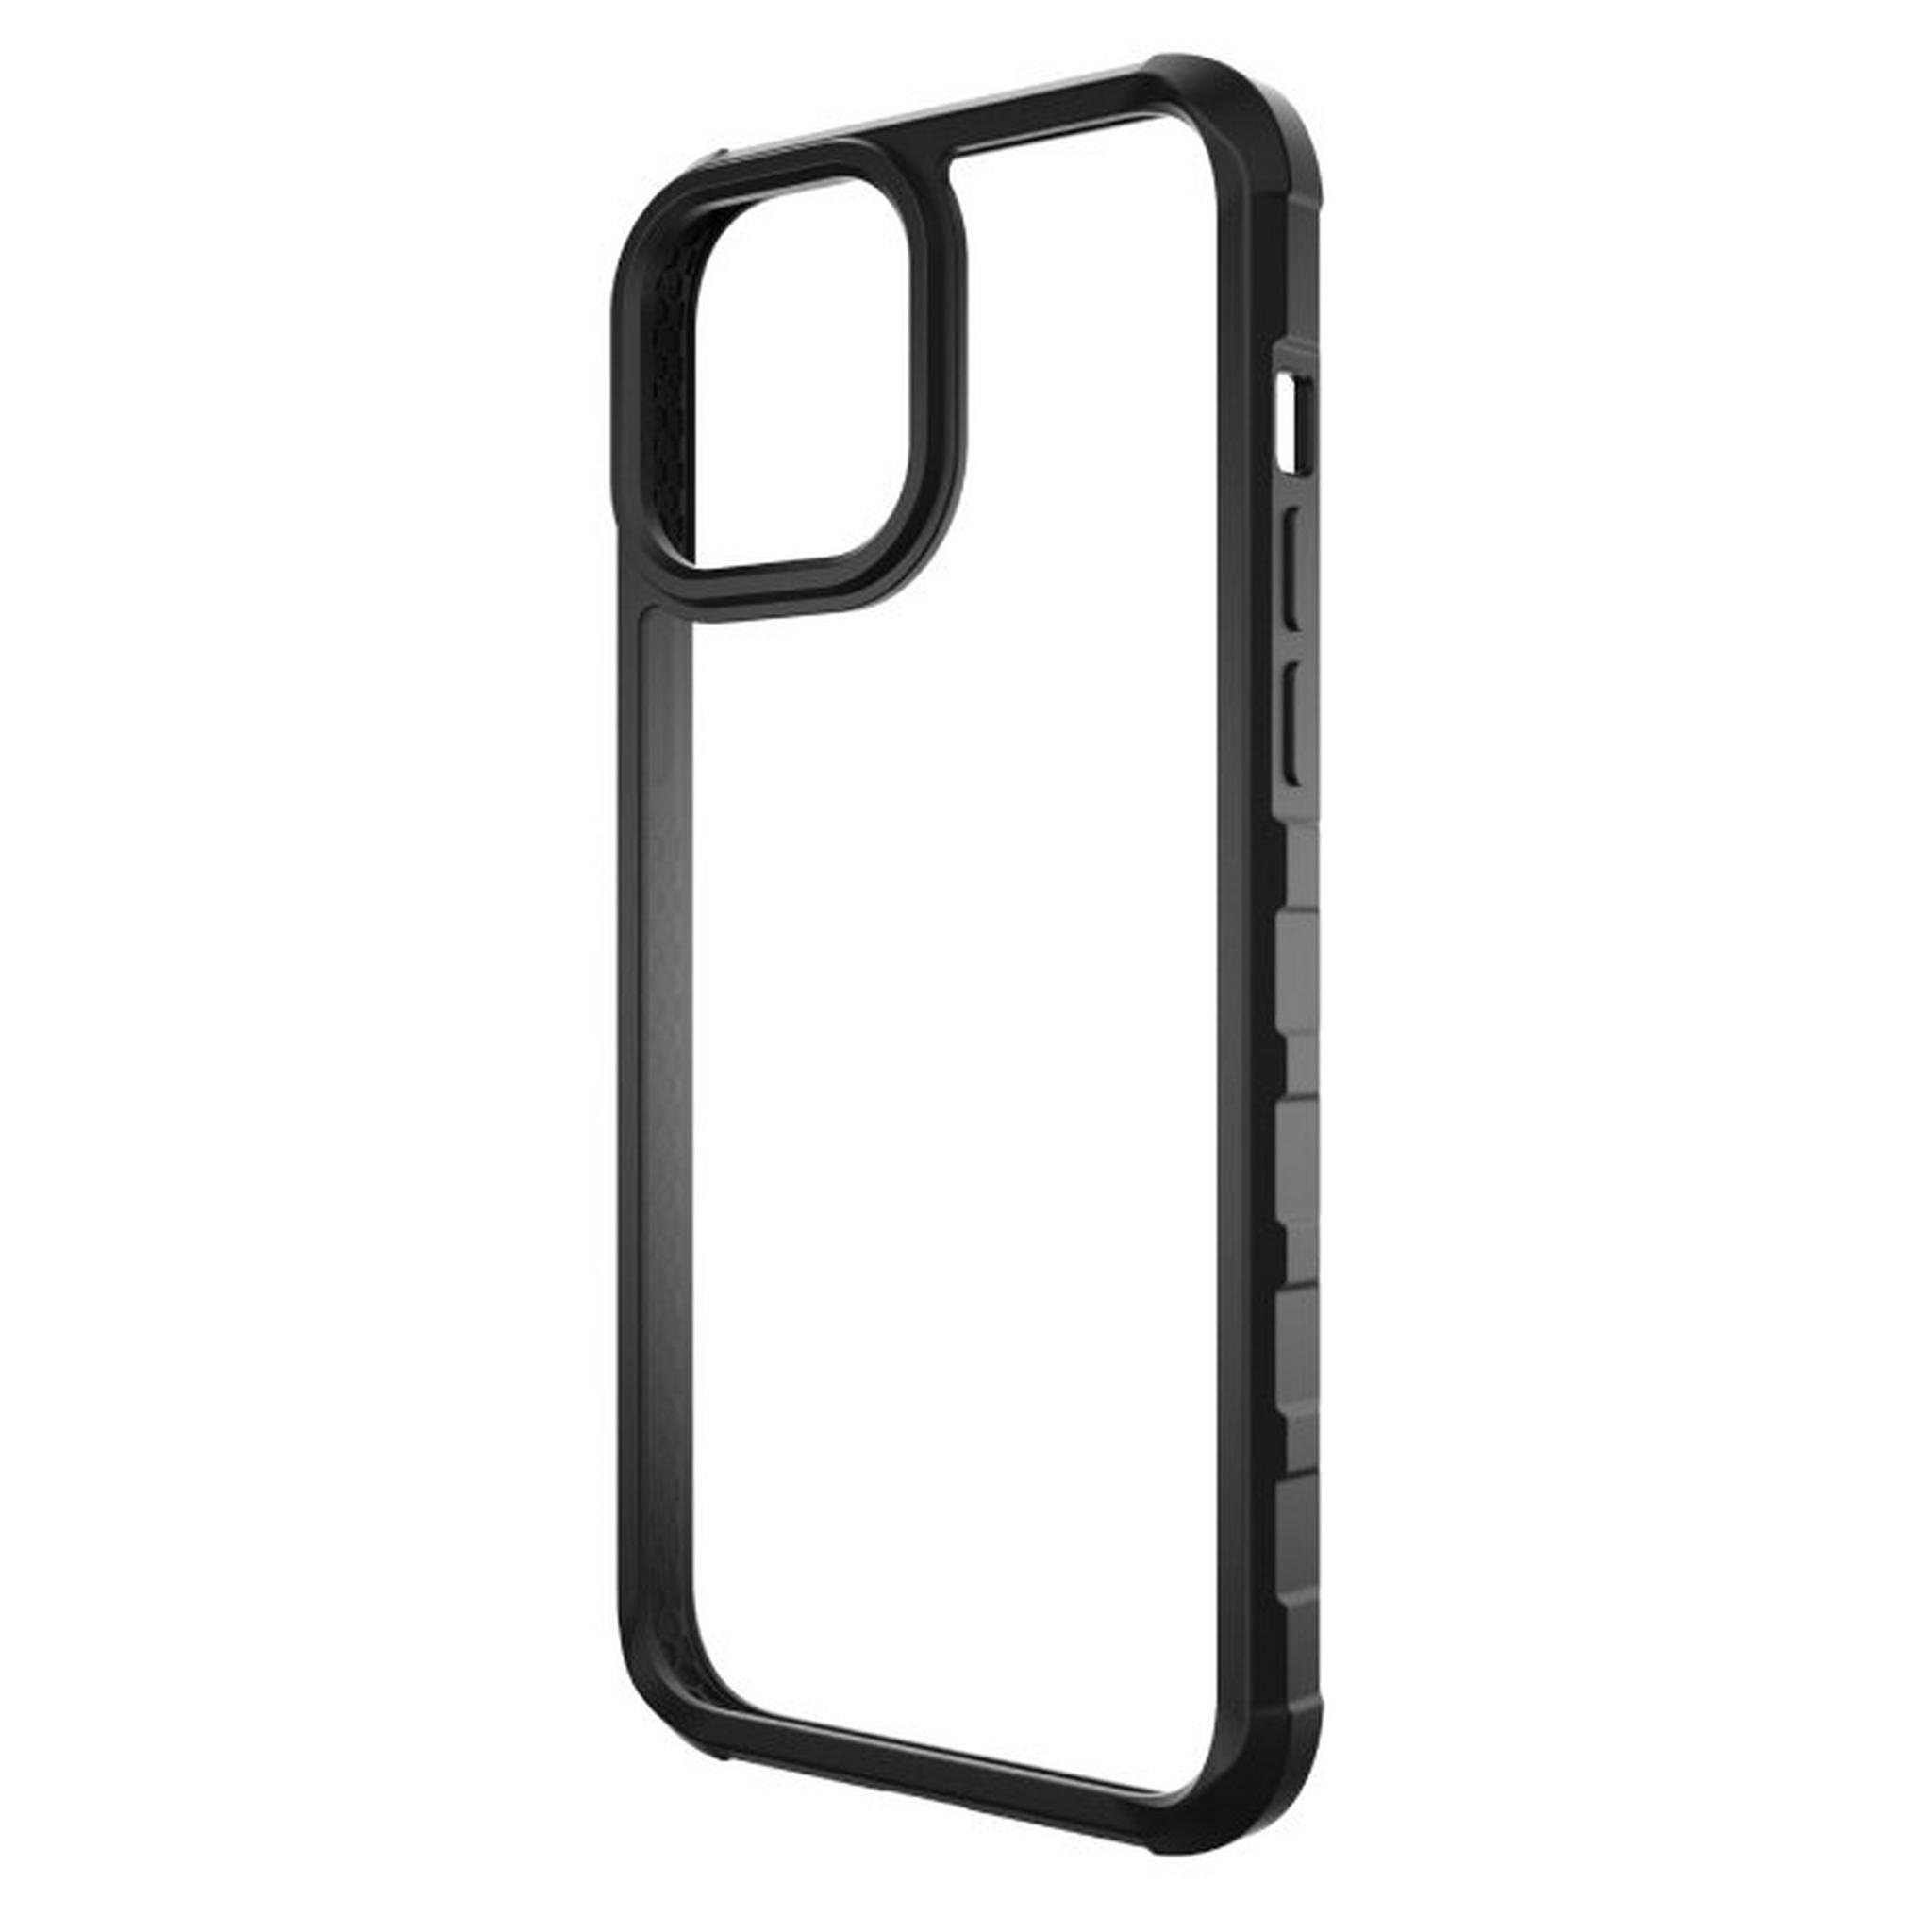 PanzerGlass SilverBullet Case for iPhone 13 Pro - Black/Clear